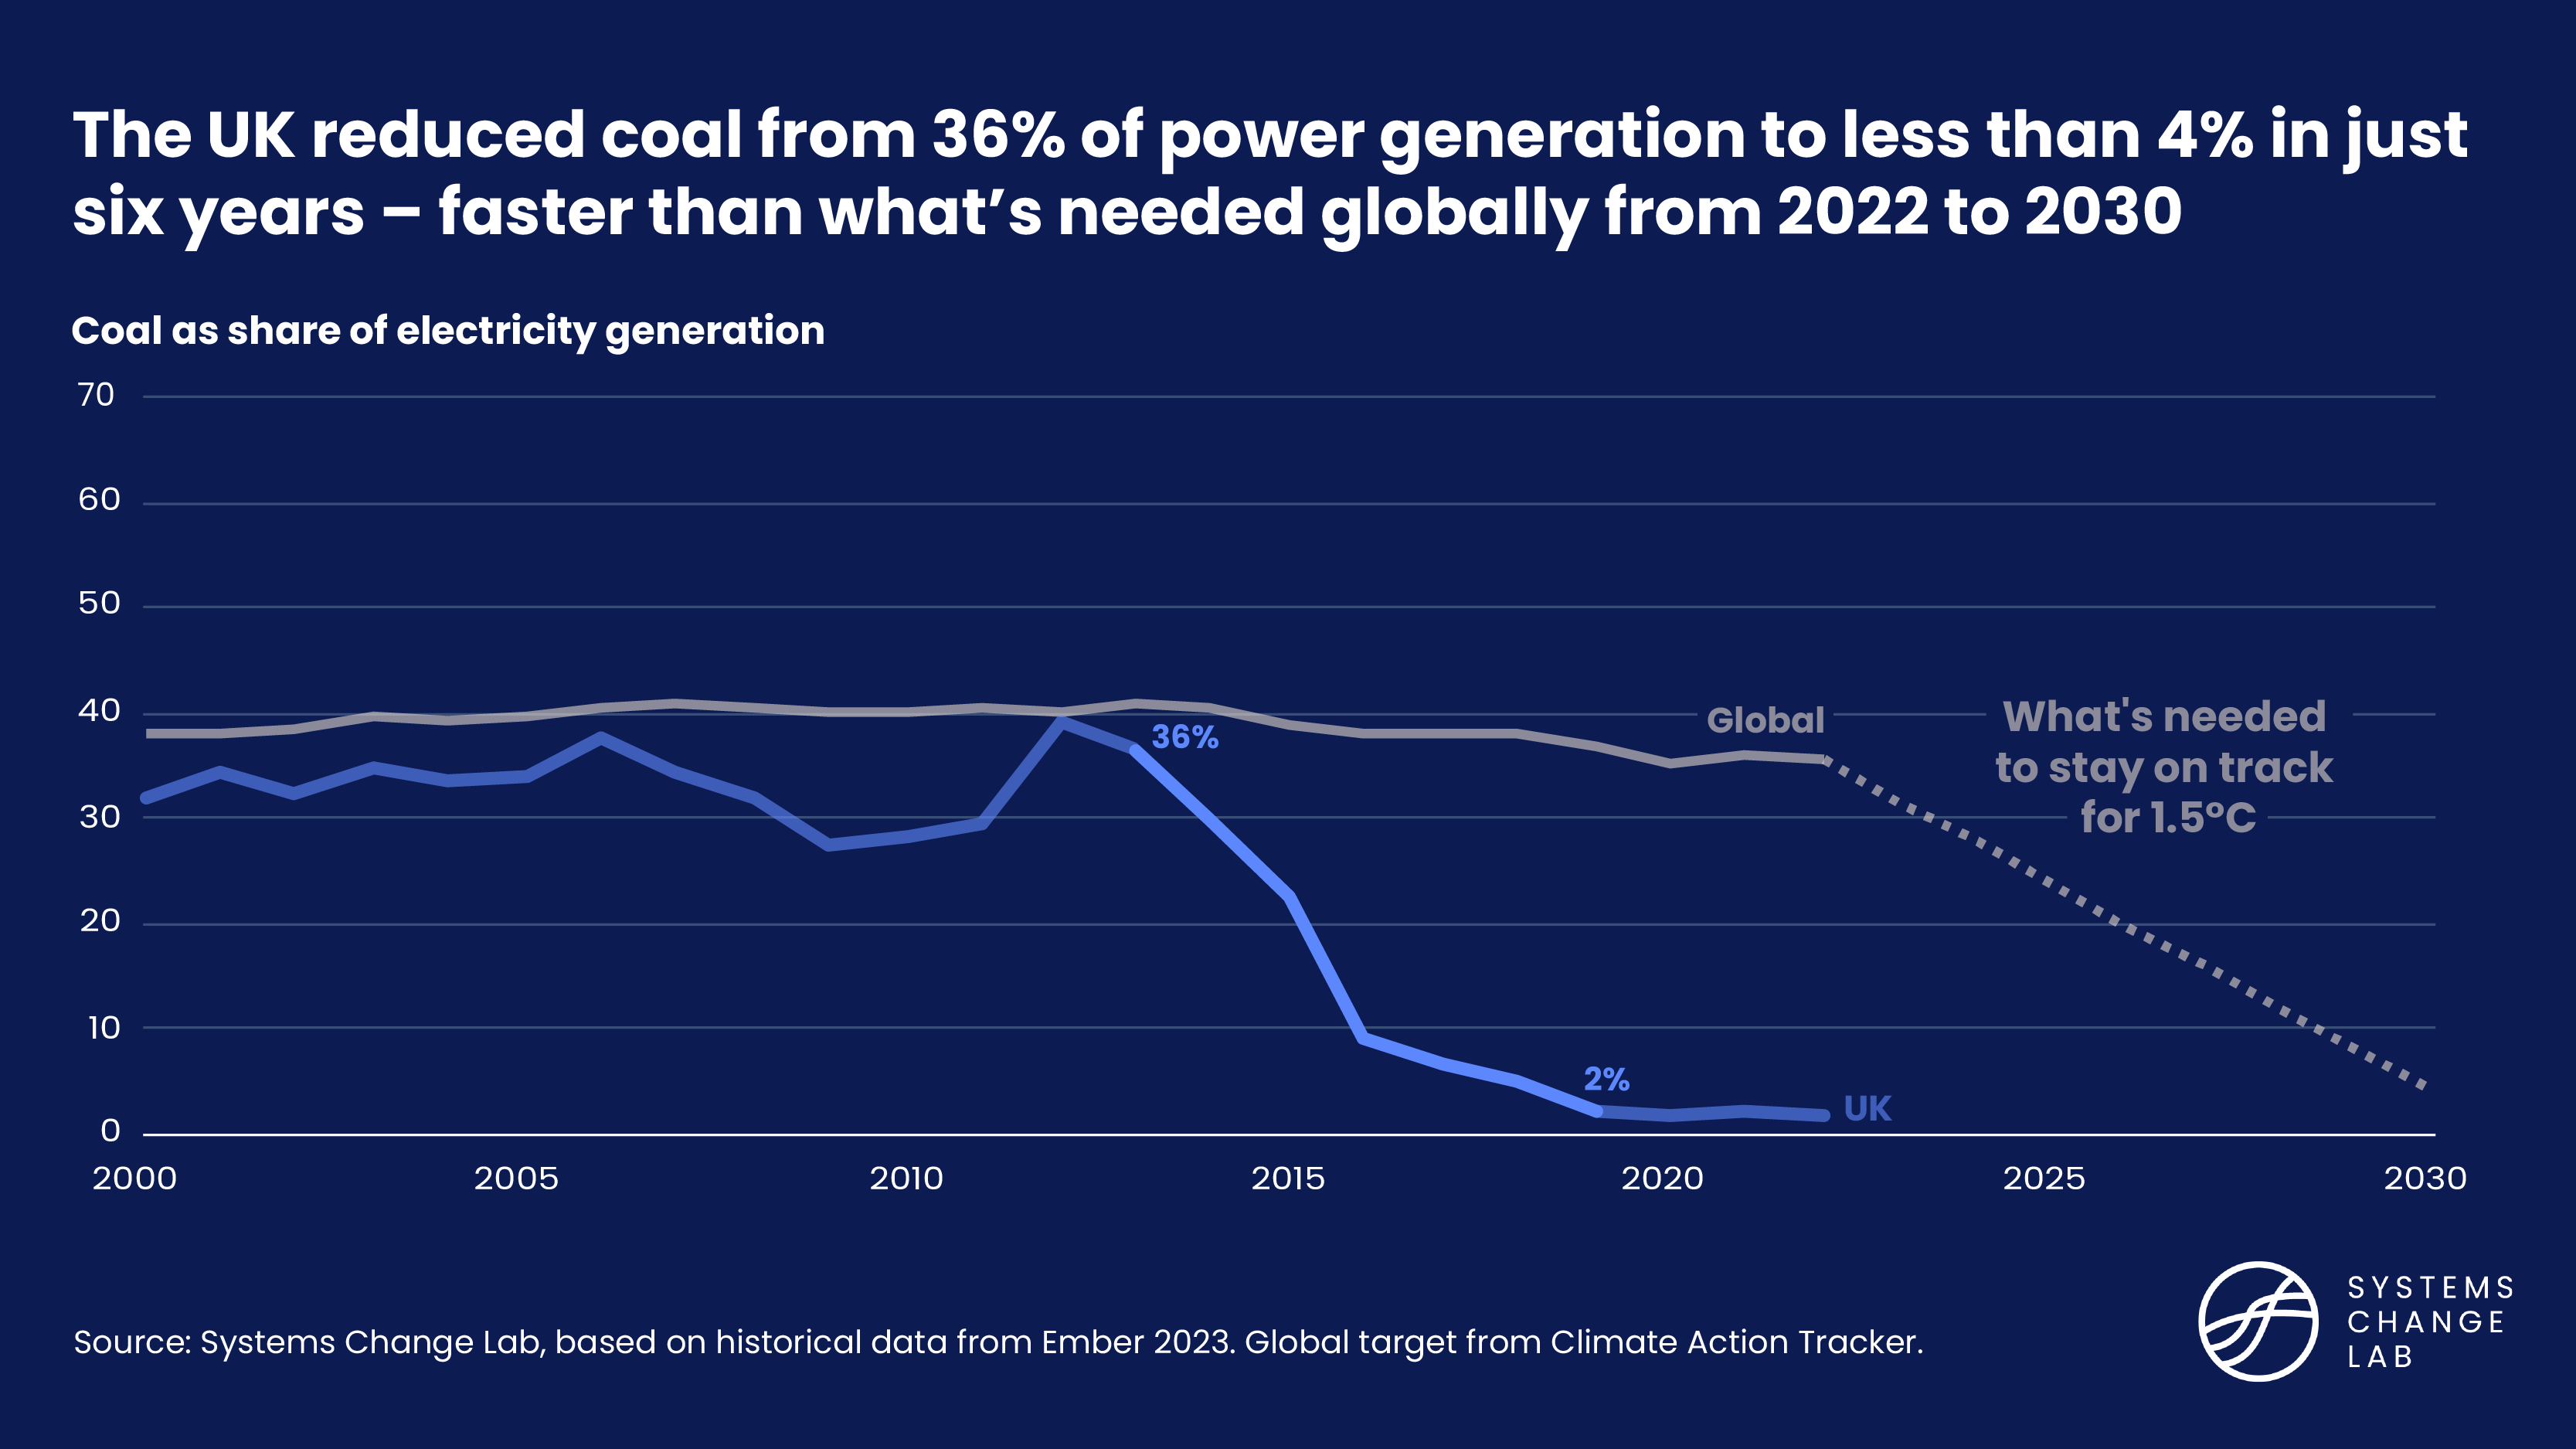 The UK reduced coal from 36% of power generation to less than 4% in just six years - faster than what's needed globally from 2022 to 2030